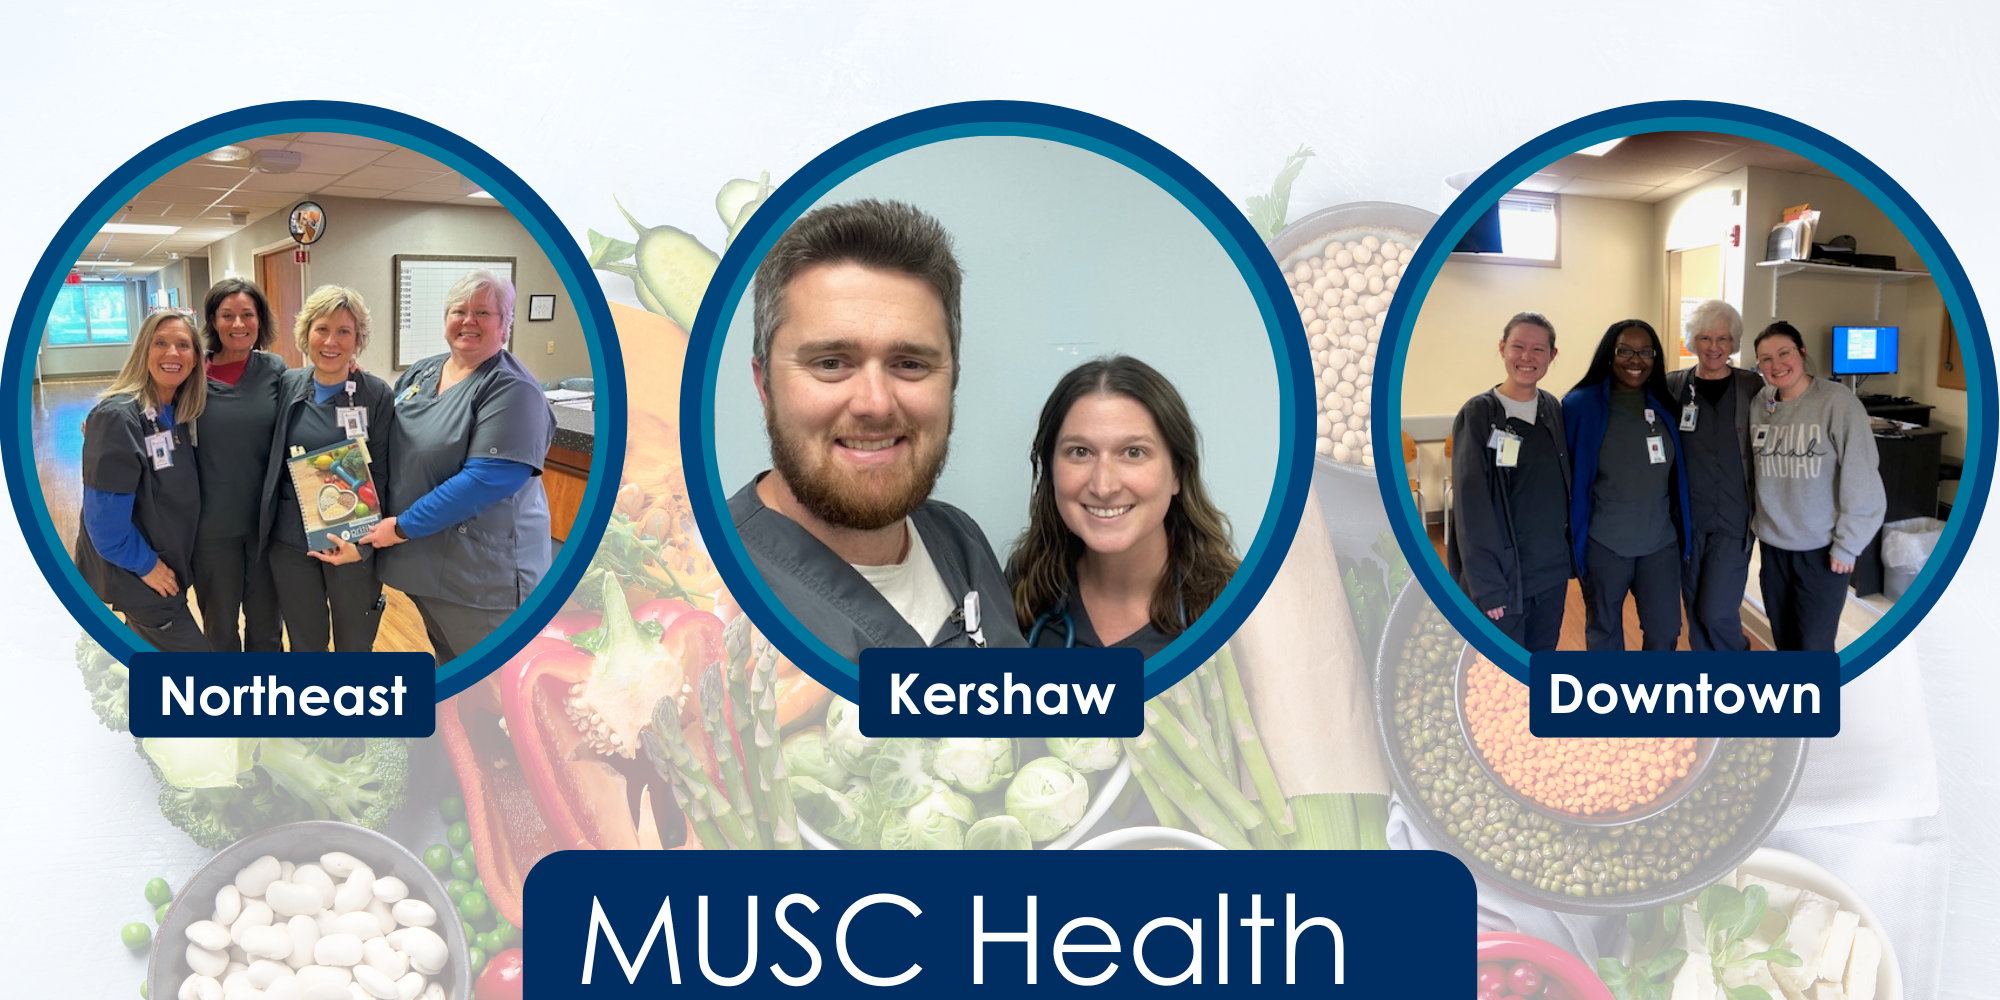 Against a muted backdrop of fresh vegetables and dried legumes over a white background are three circular images, each of groups of MUSC Cardiac Rehab team members wearing scrubs. The first has four women with one holding a patient guidebook over the title 